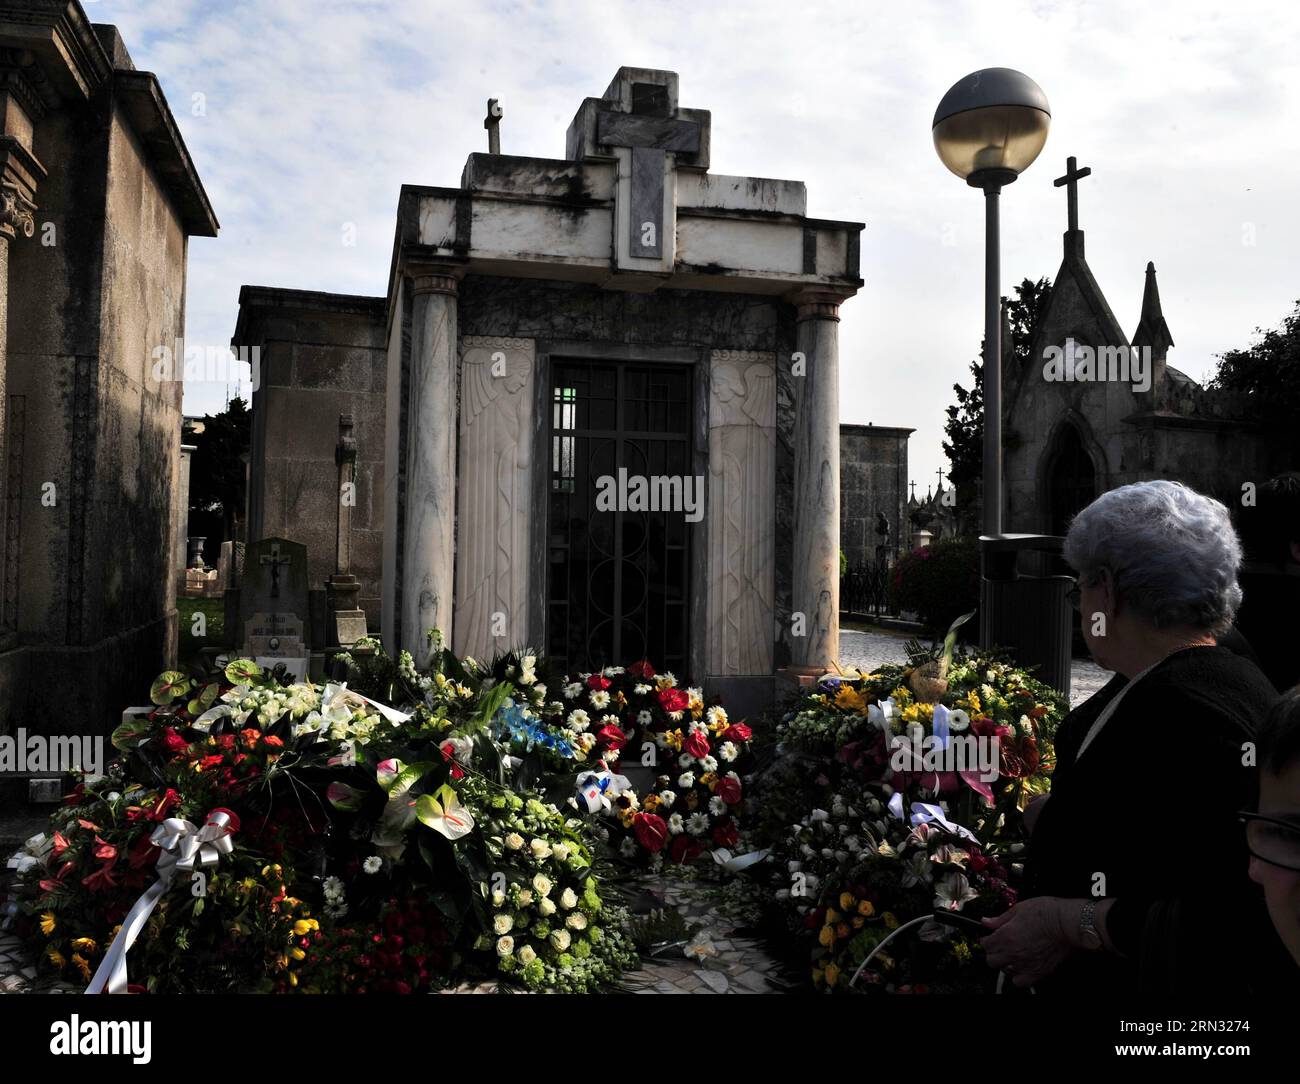 An old woman mourns at the tomb of Portuguese filmmaker Manoel de Oliveira in Porto, Portugal, on April 3, 2015. Portuguese filmmaker Manoel de Oliveira died on Thursday aged 106. The filmmaker made over 50 films in his career which began in 1931. ) (zcc) PORTUGAL-PORTO-FUNERAL-OLIVEIRA ZhangxLiyun PUBLICATIONxNOTxINxCHN   to Old Woman  AT The Tomb of PORTUGUESE Filmmaker Manoel de Oliveira in Porto Portugal ON April 3 2015 PORTUGUESE Filmmaker Manoel de Oliveira died ON Thursday Aged 106 The Filmmaker Made Over 50 Films in His Career Which began in 1931 ZCC Portugal Porto Funeral Oliveira  PU Stock Photo